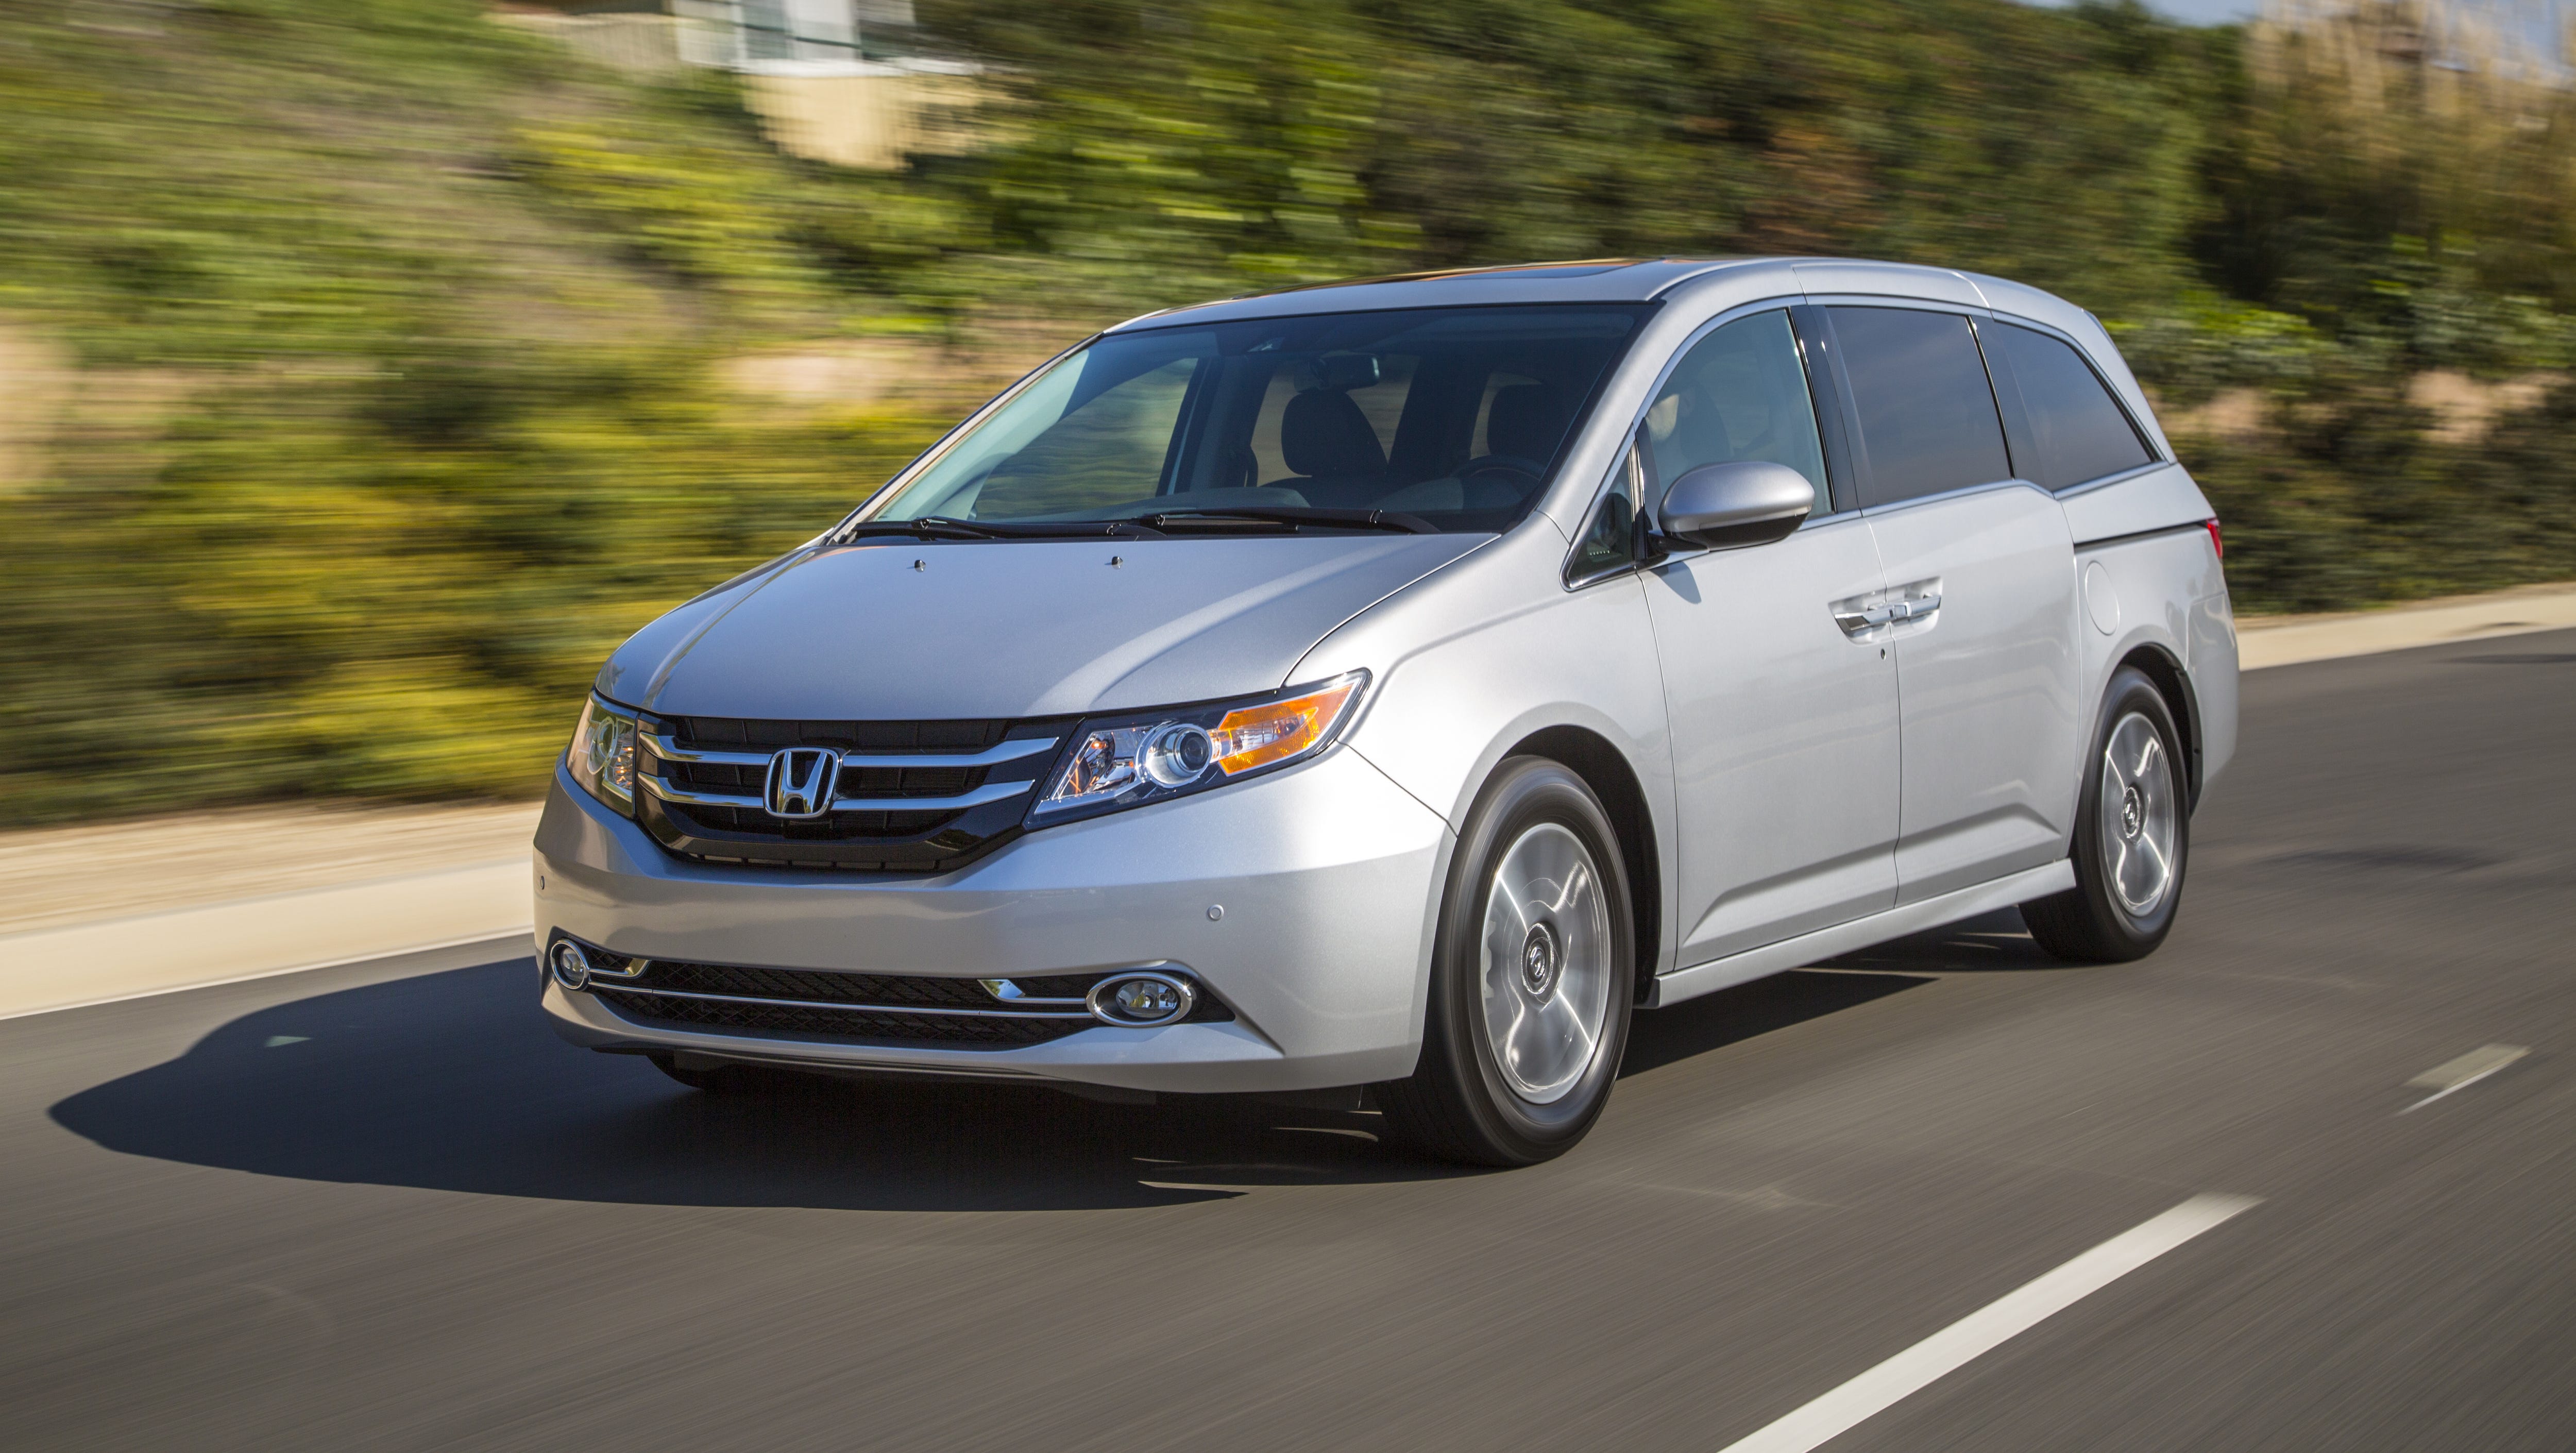 Auto review: 2014 Honda Odyssey is the go-to bus for the child-endowed